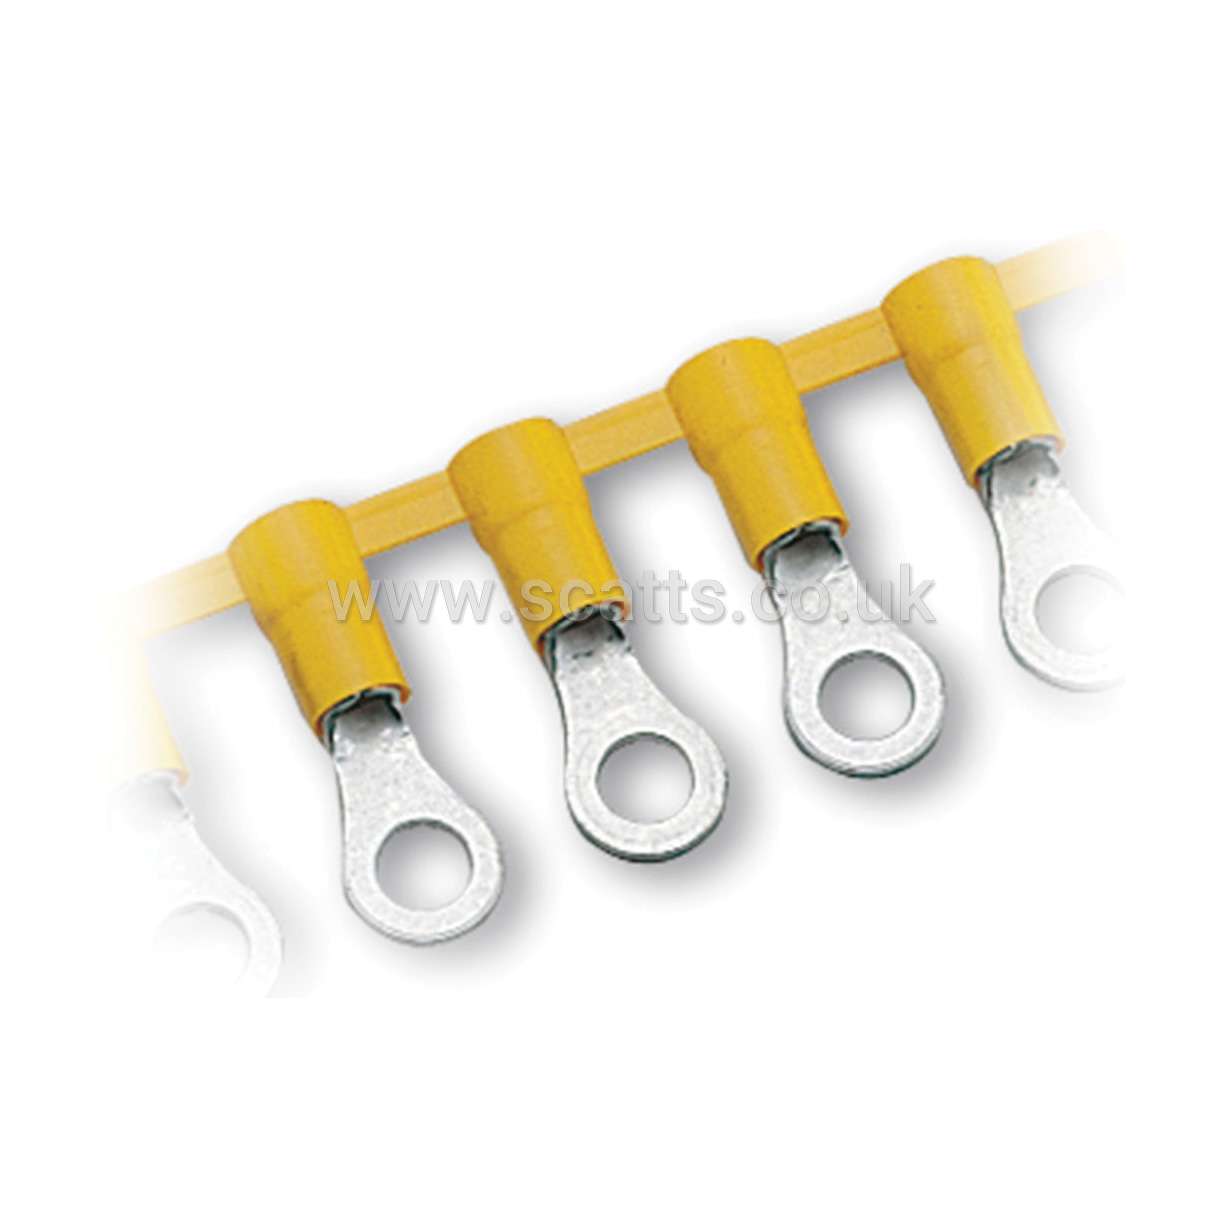 Hooked Blade Terminals  Cembre F-PPL PVC Insulated Crimp Terminals